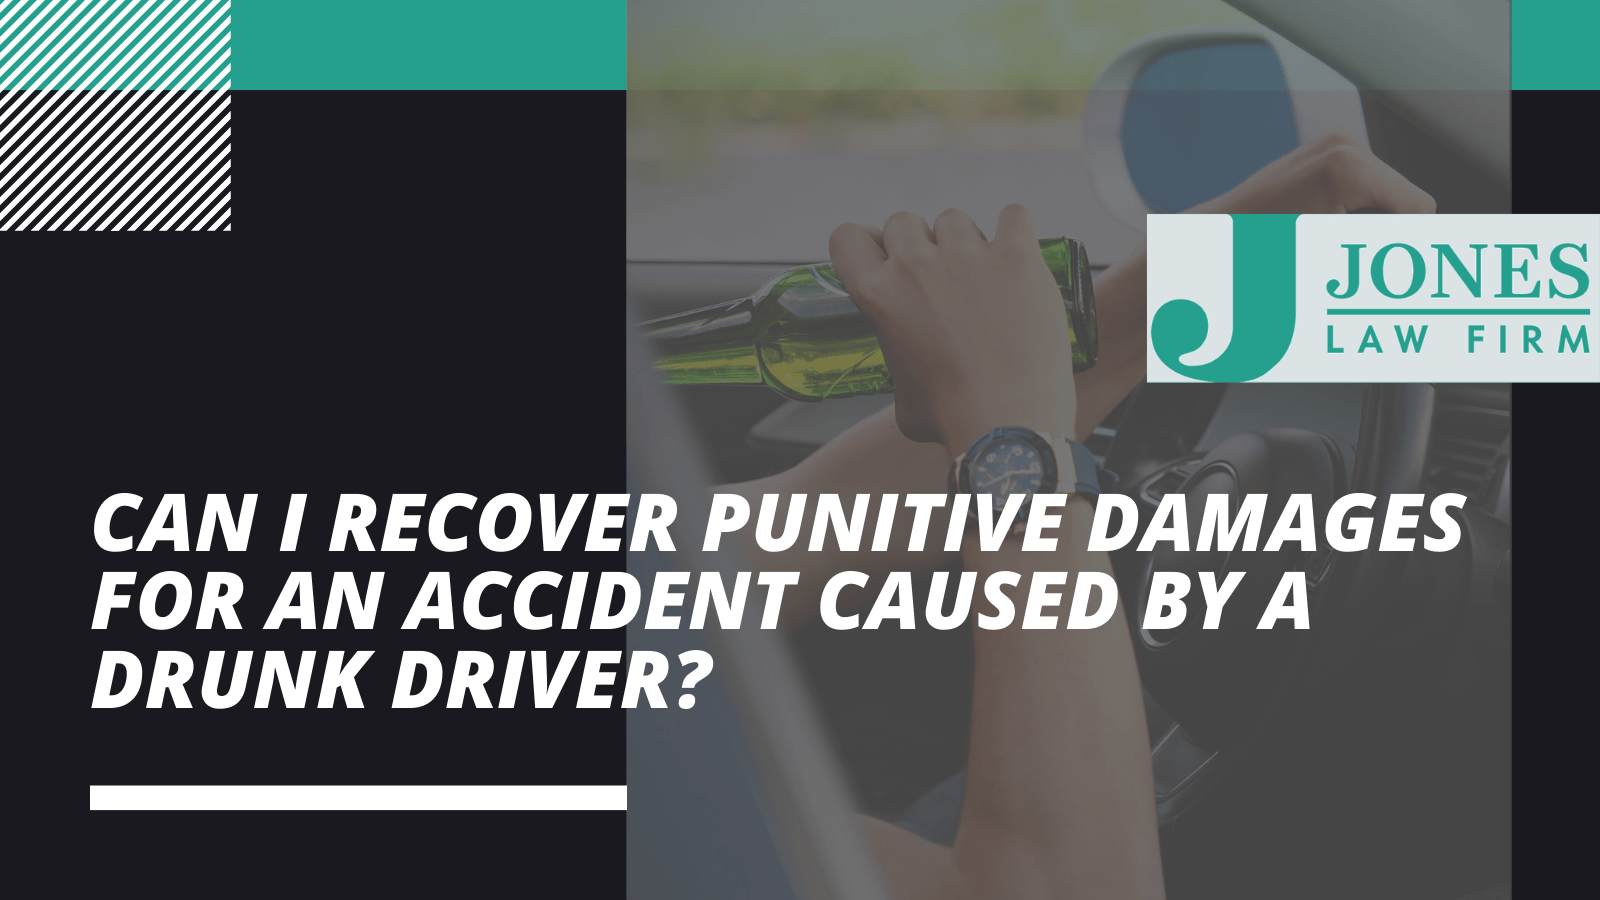 Can I RePunitive Damages for an Accident Caused by a Drunk Driver - Jones law firm - Alexandria louisiana